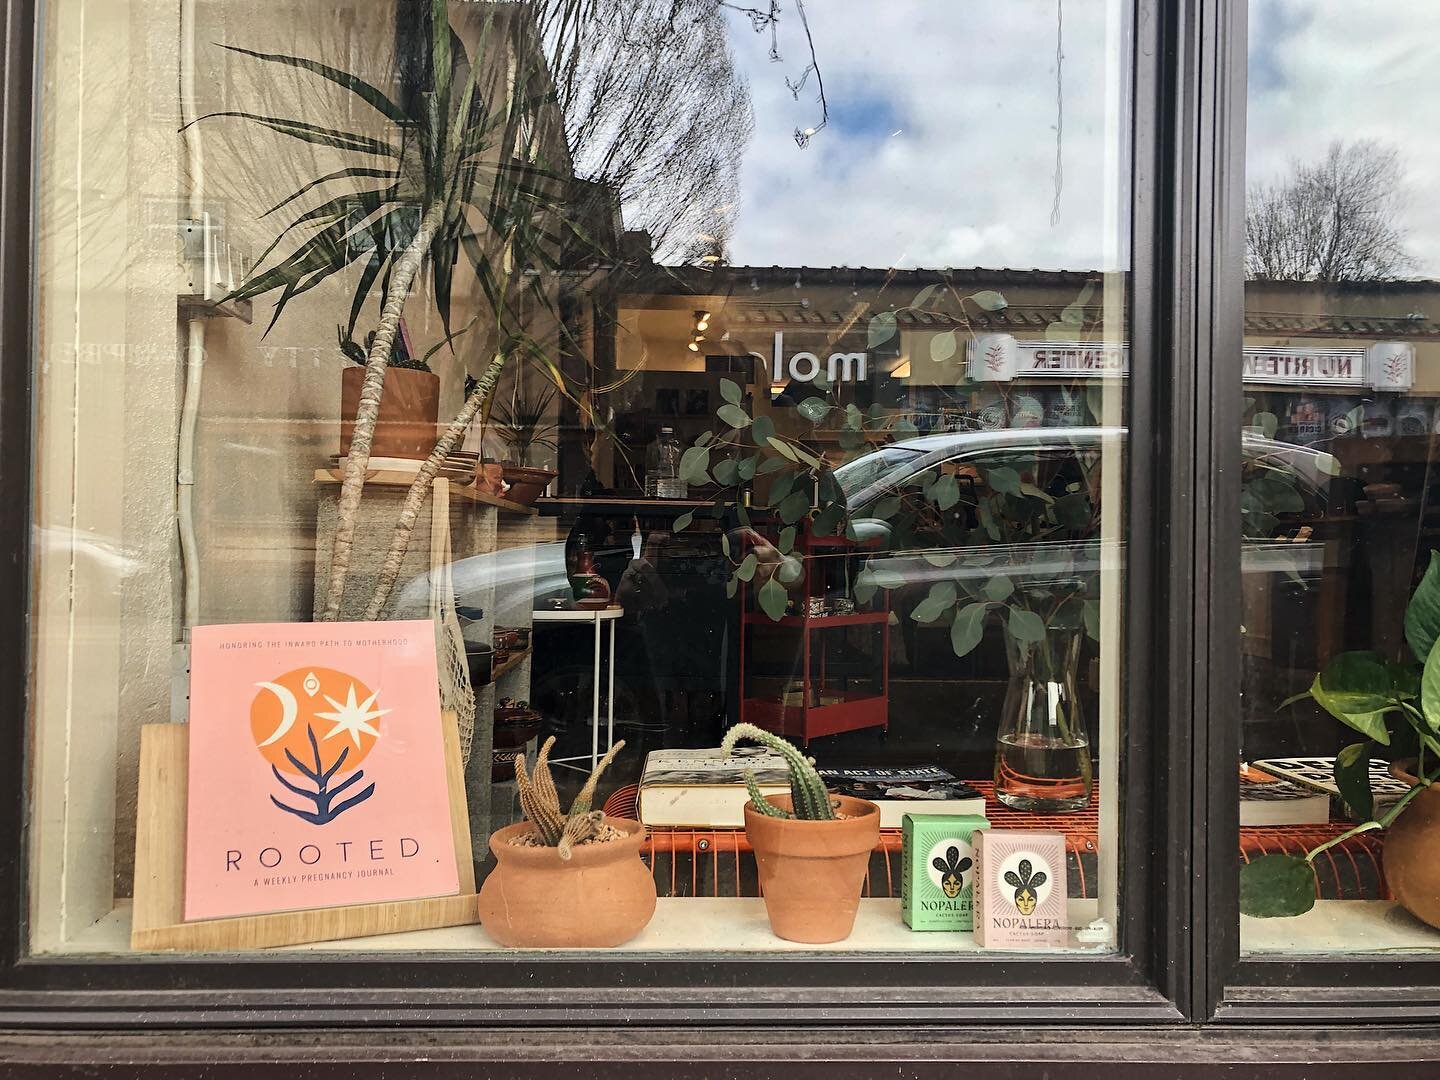 Portland friends! There are only two copies of @rootedmotherjournal left at @santana_general on Mississippi Ave. This cute family-run store has curated home goods, apparel, great books and other sweet finds like ceramics and vintage rugs. Honored to 